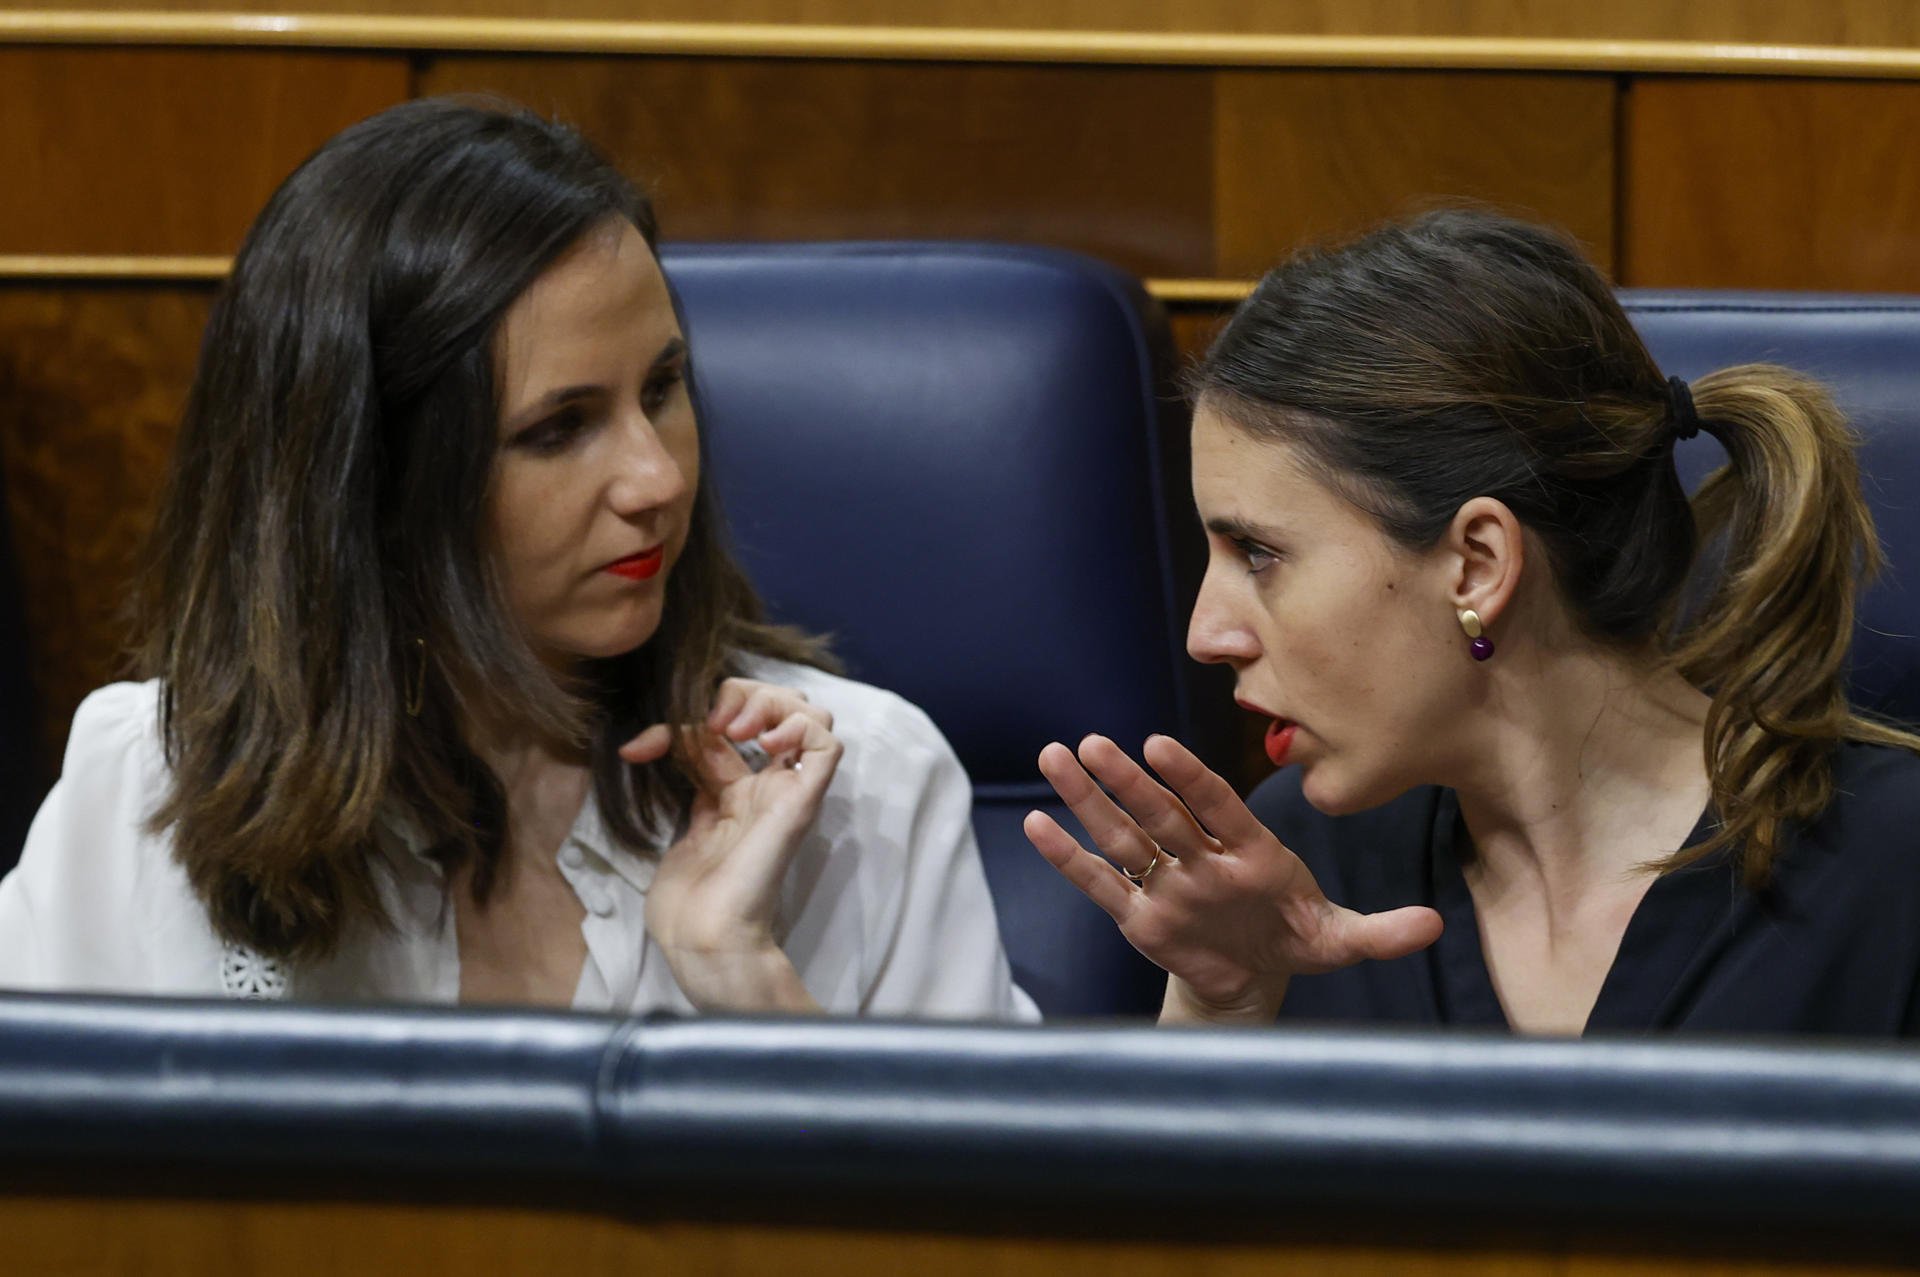 Podemos threatens Sumar and eyes standing alone in Valencian Country on 23rd July